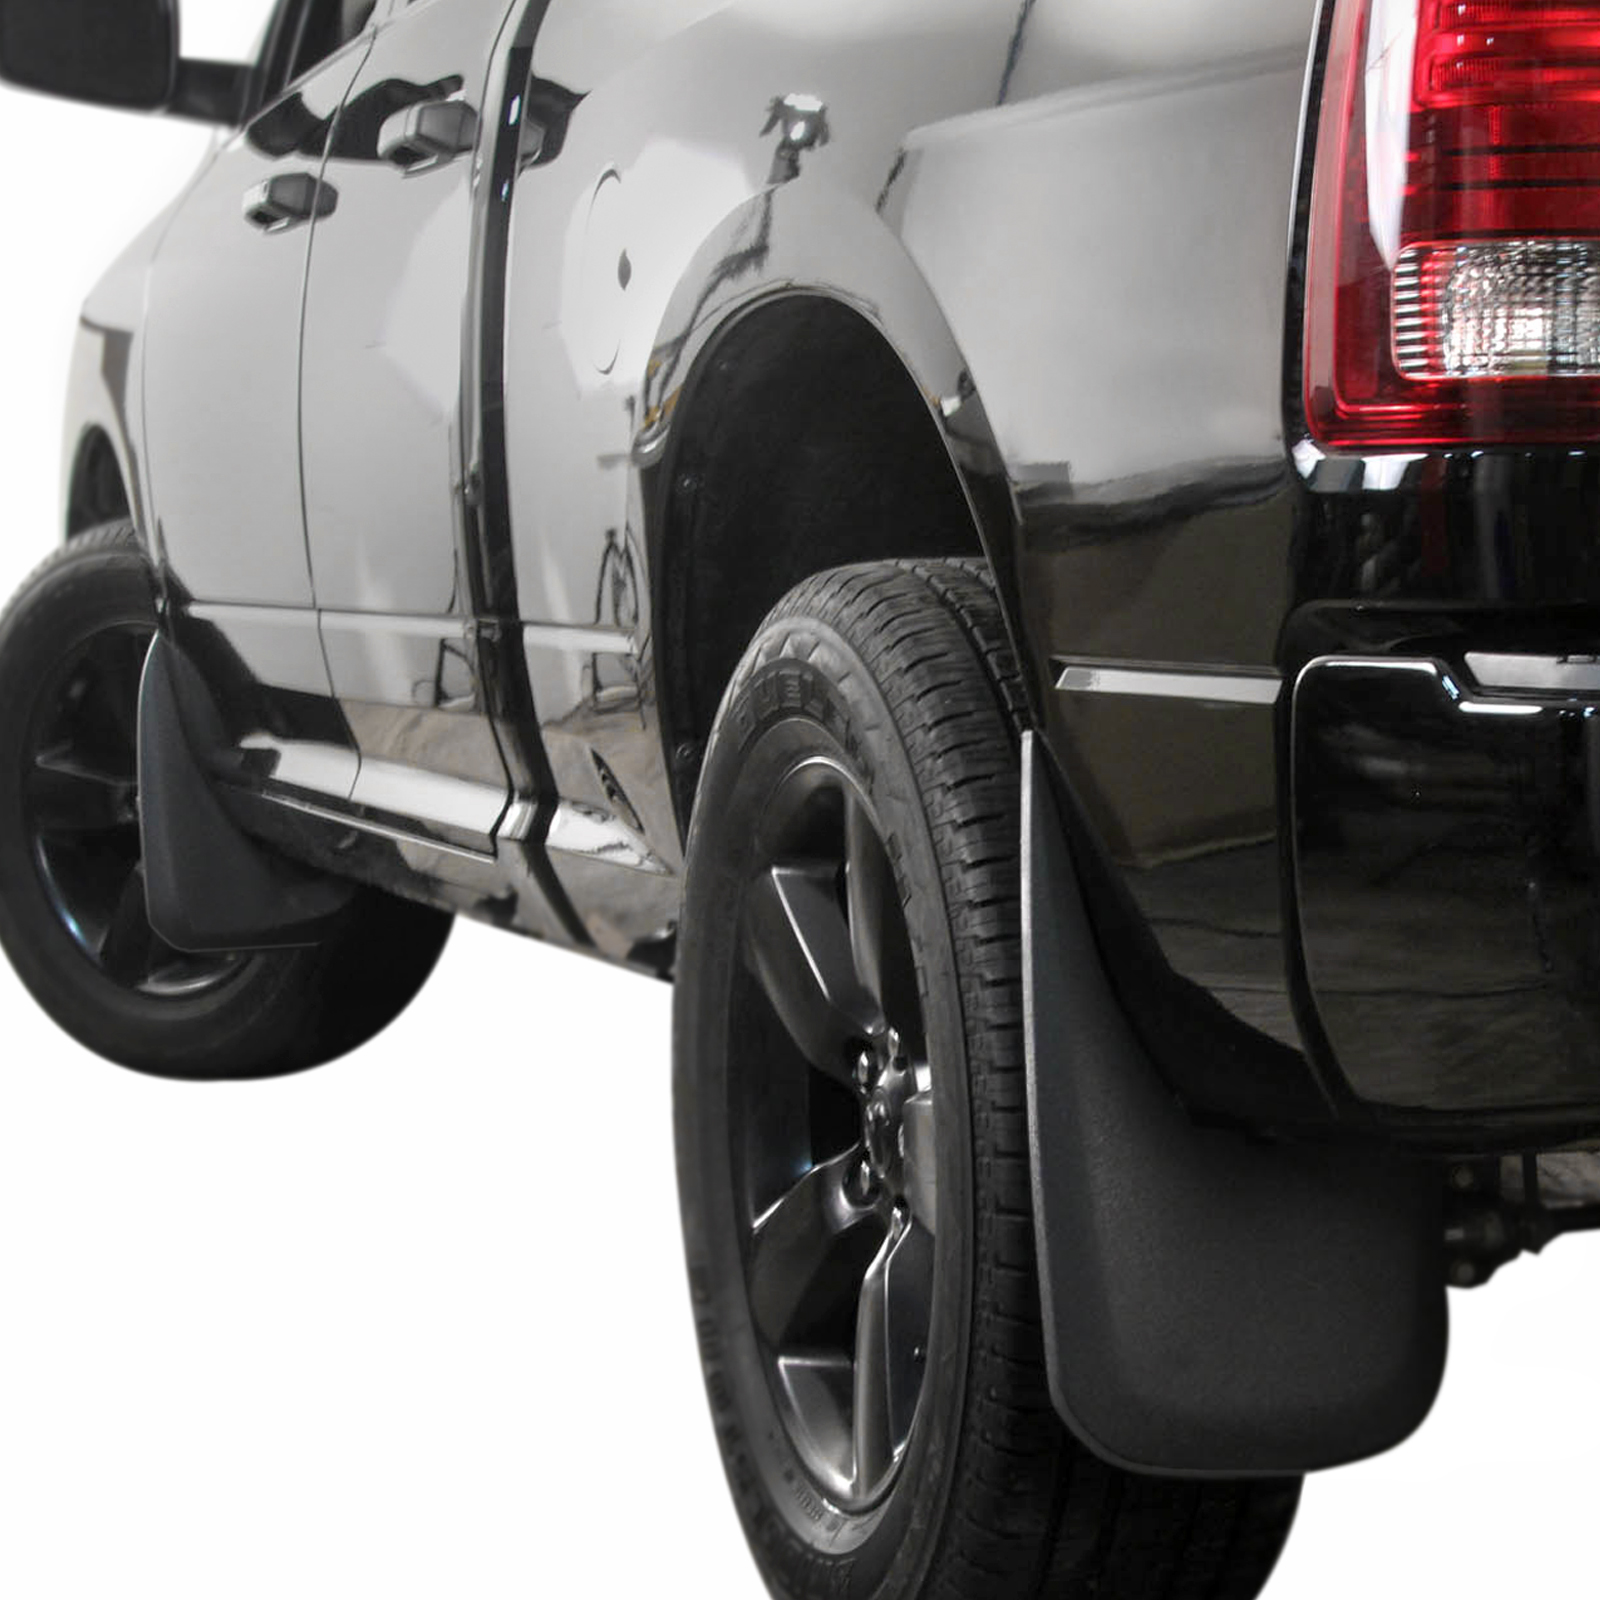 Premium Mud Flaps Splash Guards Compatible with Dodge Ram (1500 2009-2018, 1500 Classic 2019, 2500 3500 2010-2018) Molded Front Rear 4 Piece Set for Trucks Without Fender Flares 82211228, 82212287AC - image 2 of 8